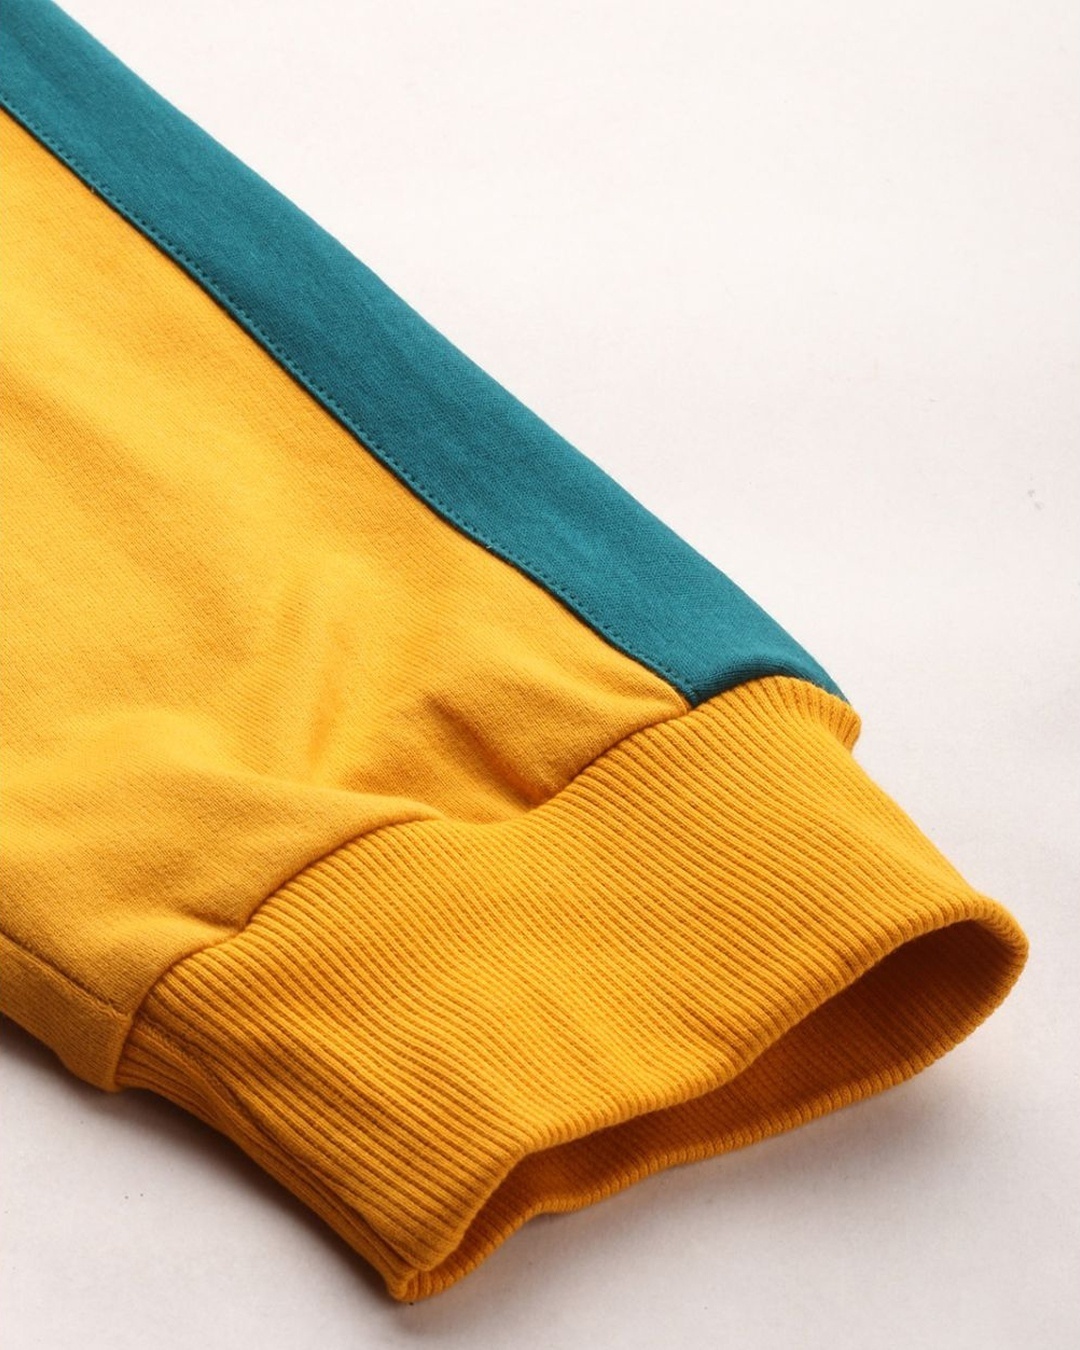 Shop Women's Yellow Solid Joggers